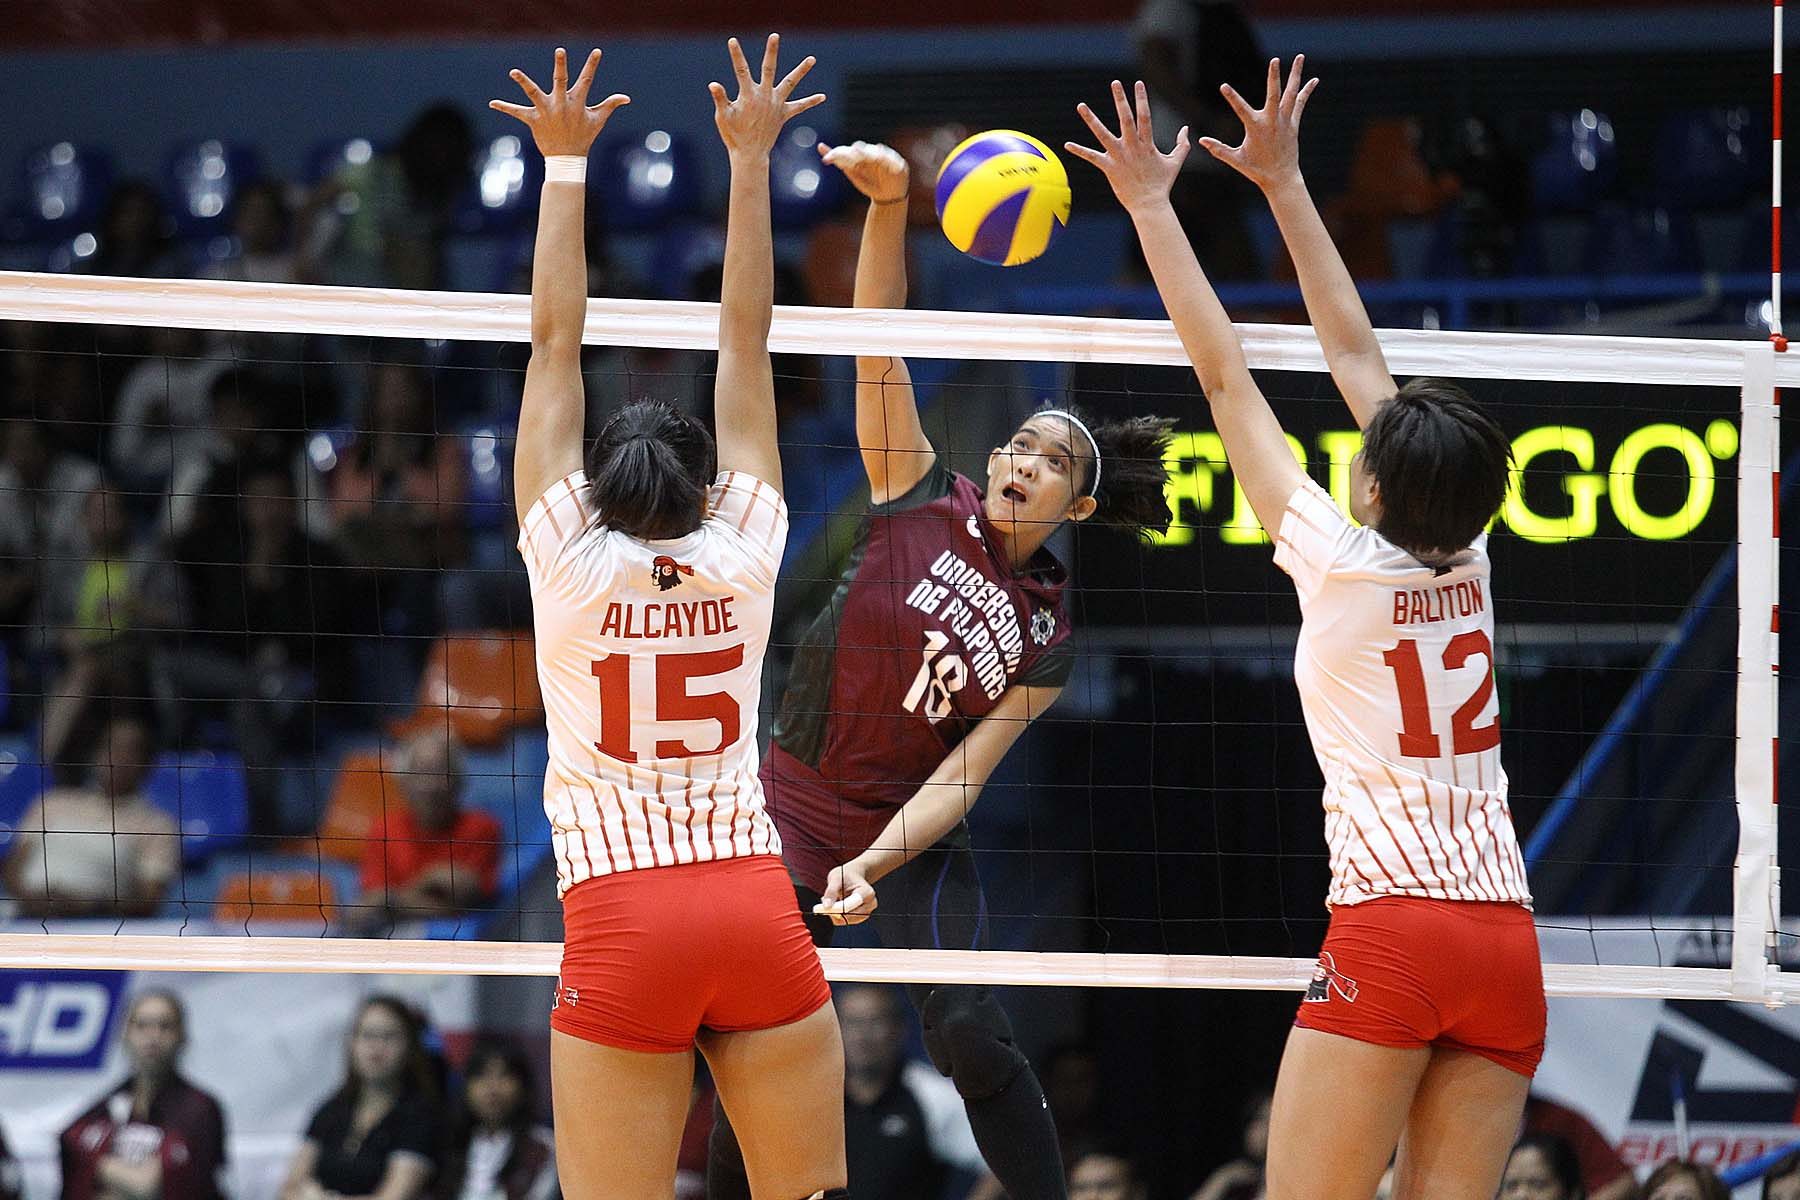 UP Lady Maroons clinch second straight victory with sweep of UE